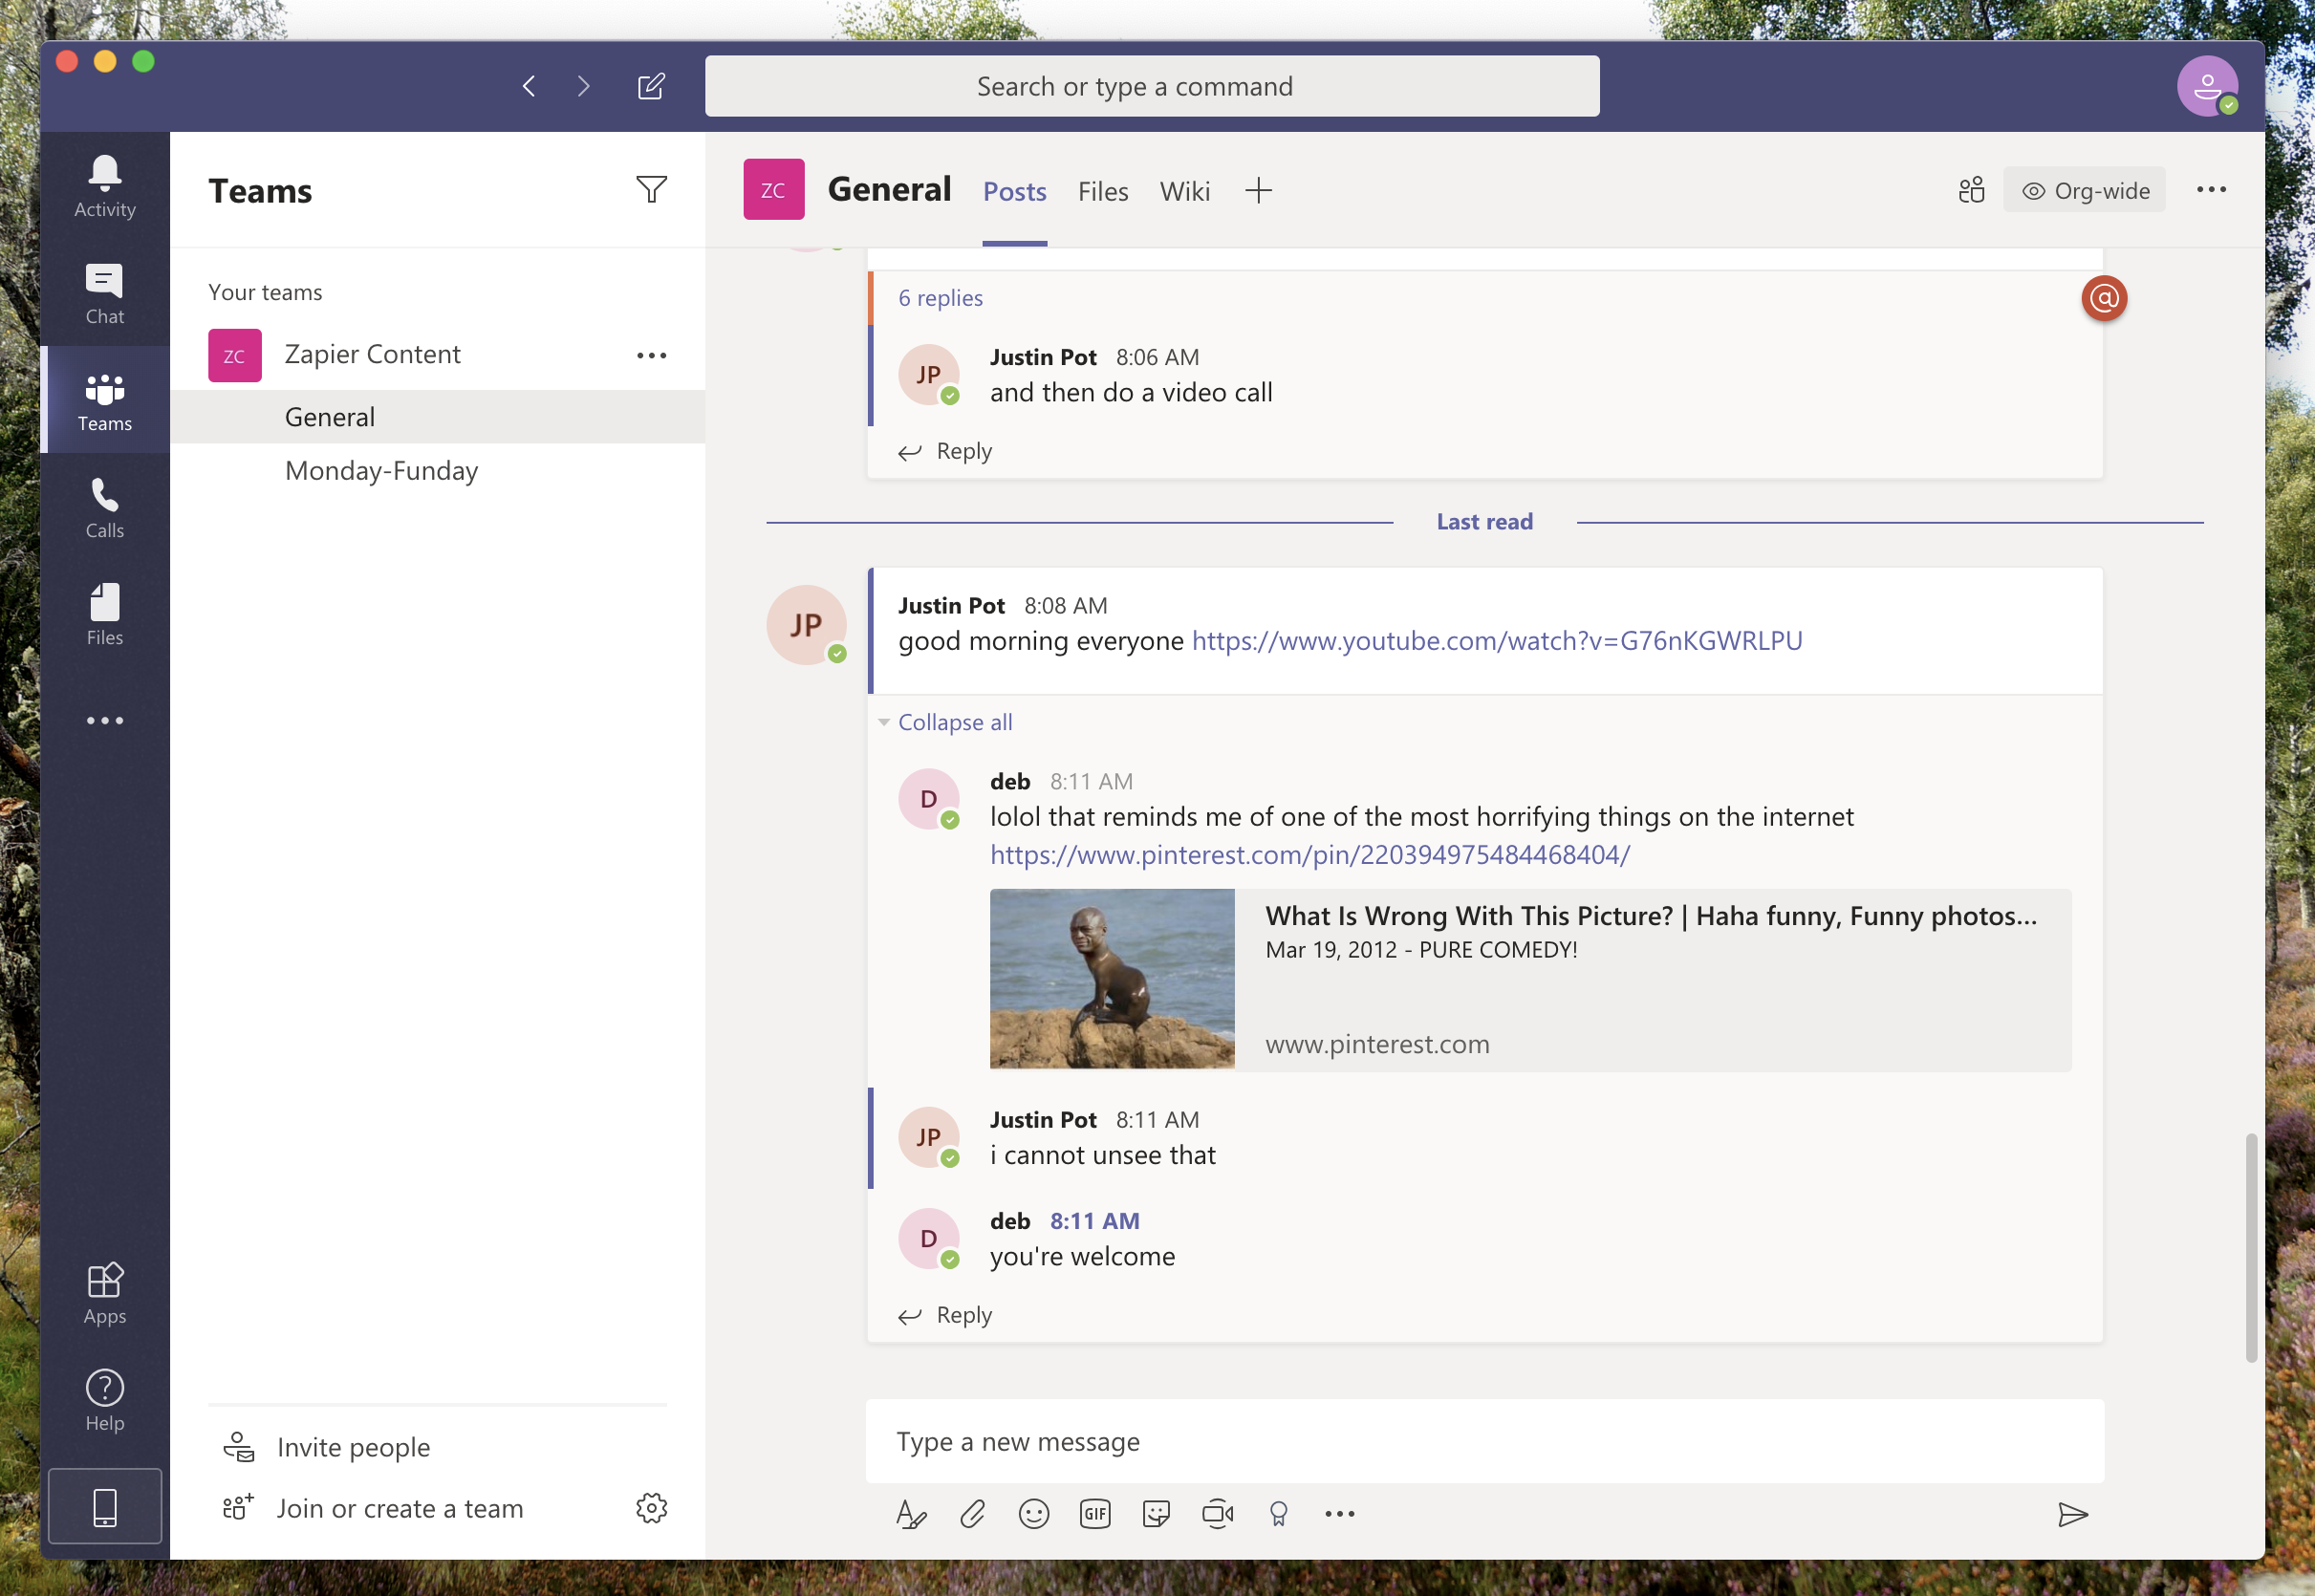 How to Use Microsoft Teams for Free